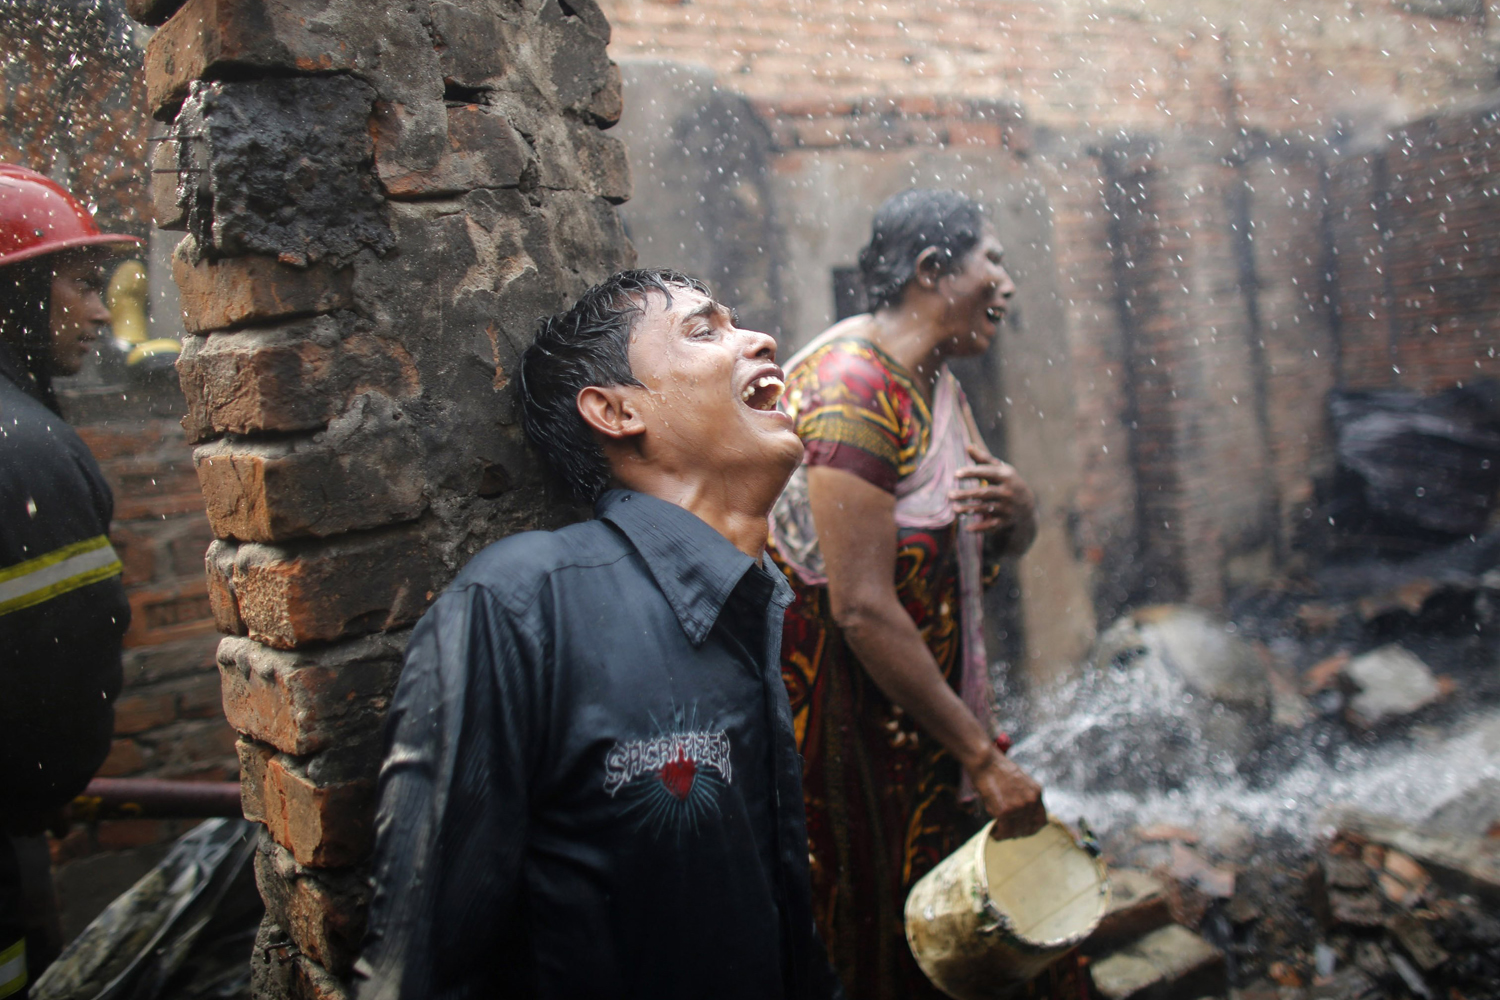 Feb. 11, 2014. People cry after losing all of their belongings in a fire at a slum at Mirpur in Dhaka.